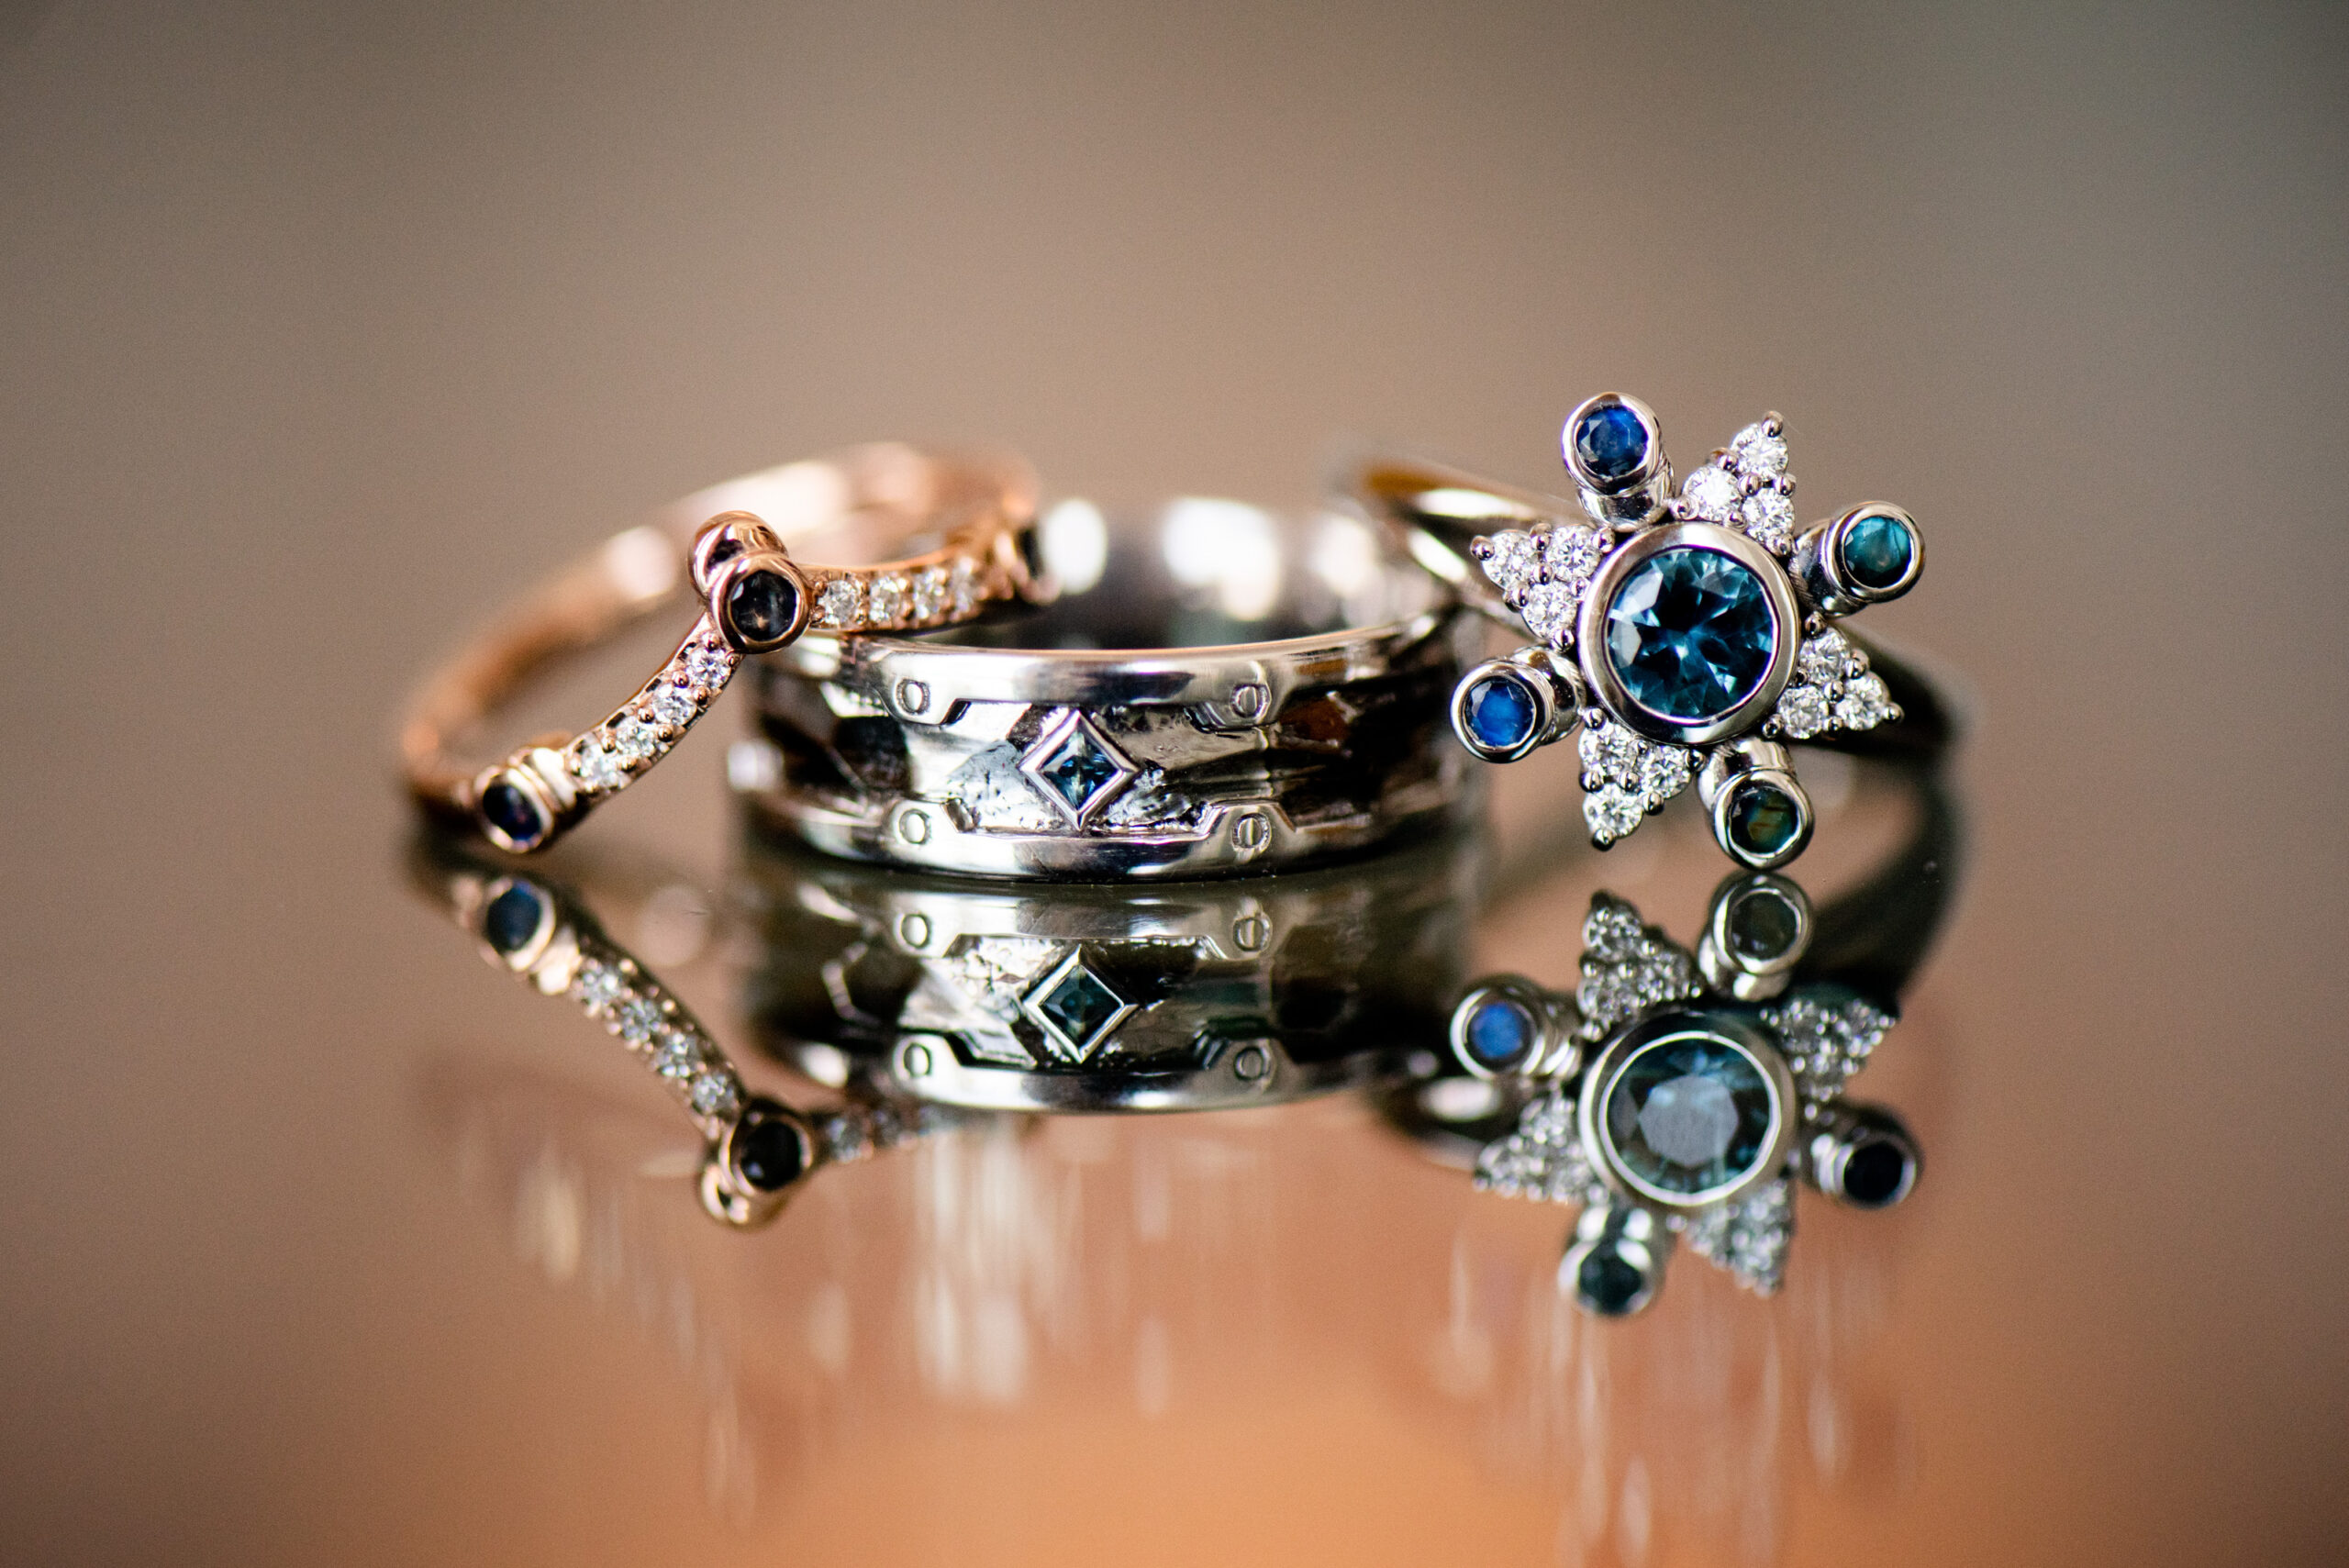 Three white gold wedding rings sit on a table. The rings are clearly custom made, with a variety of clear and blue stones and a star shape.